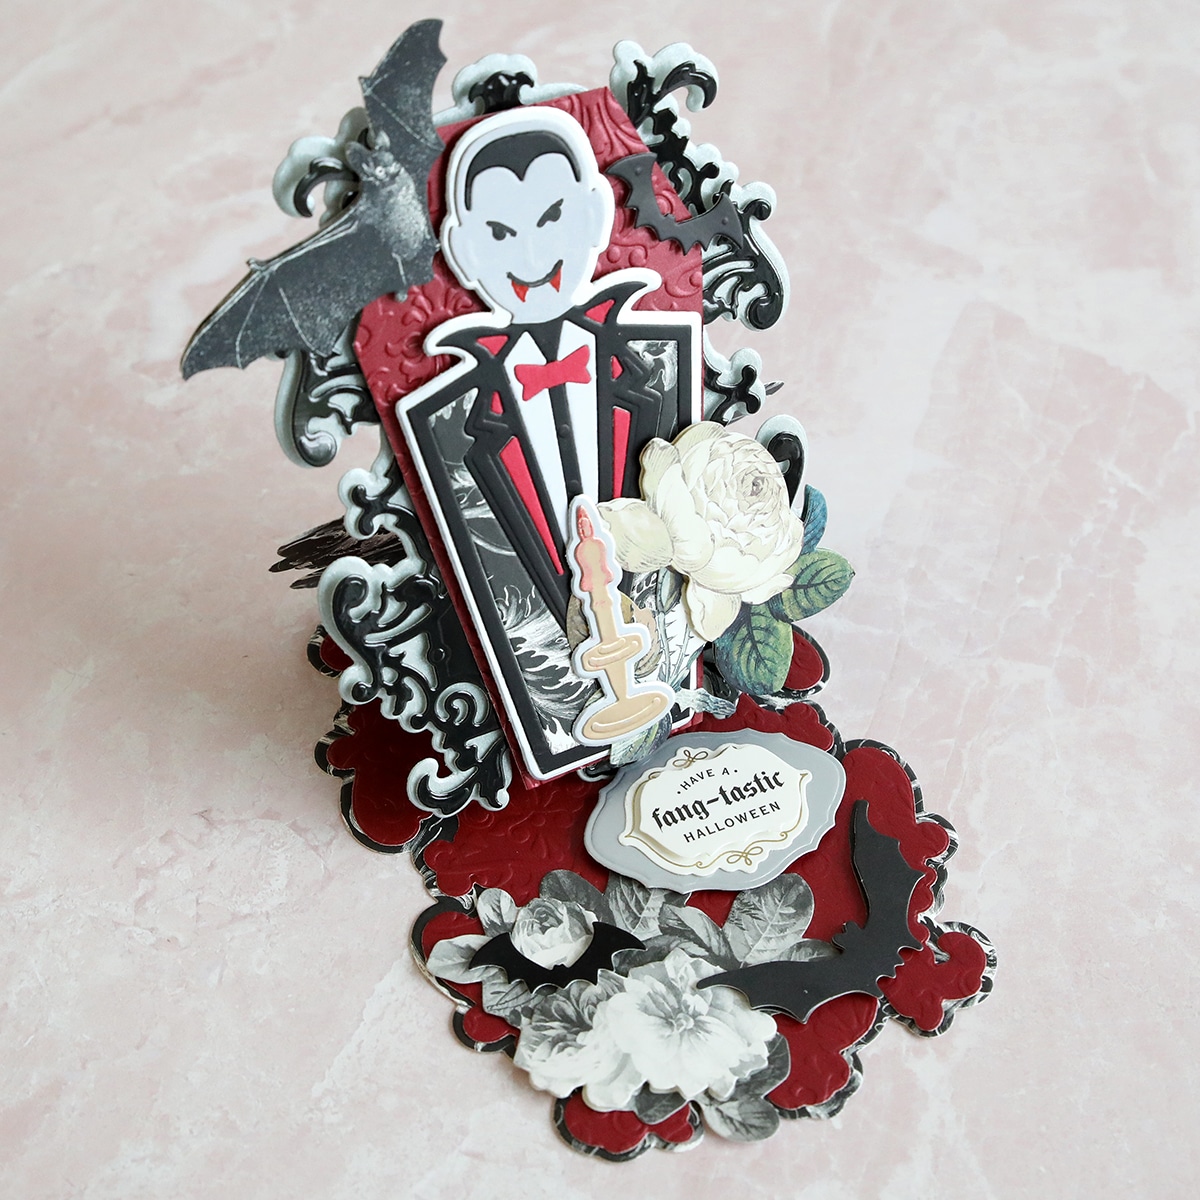 A pop up card with a dracula and bats.